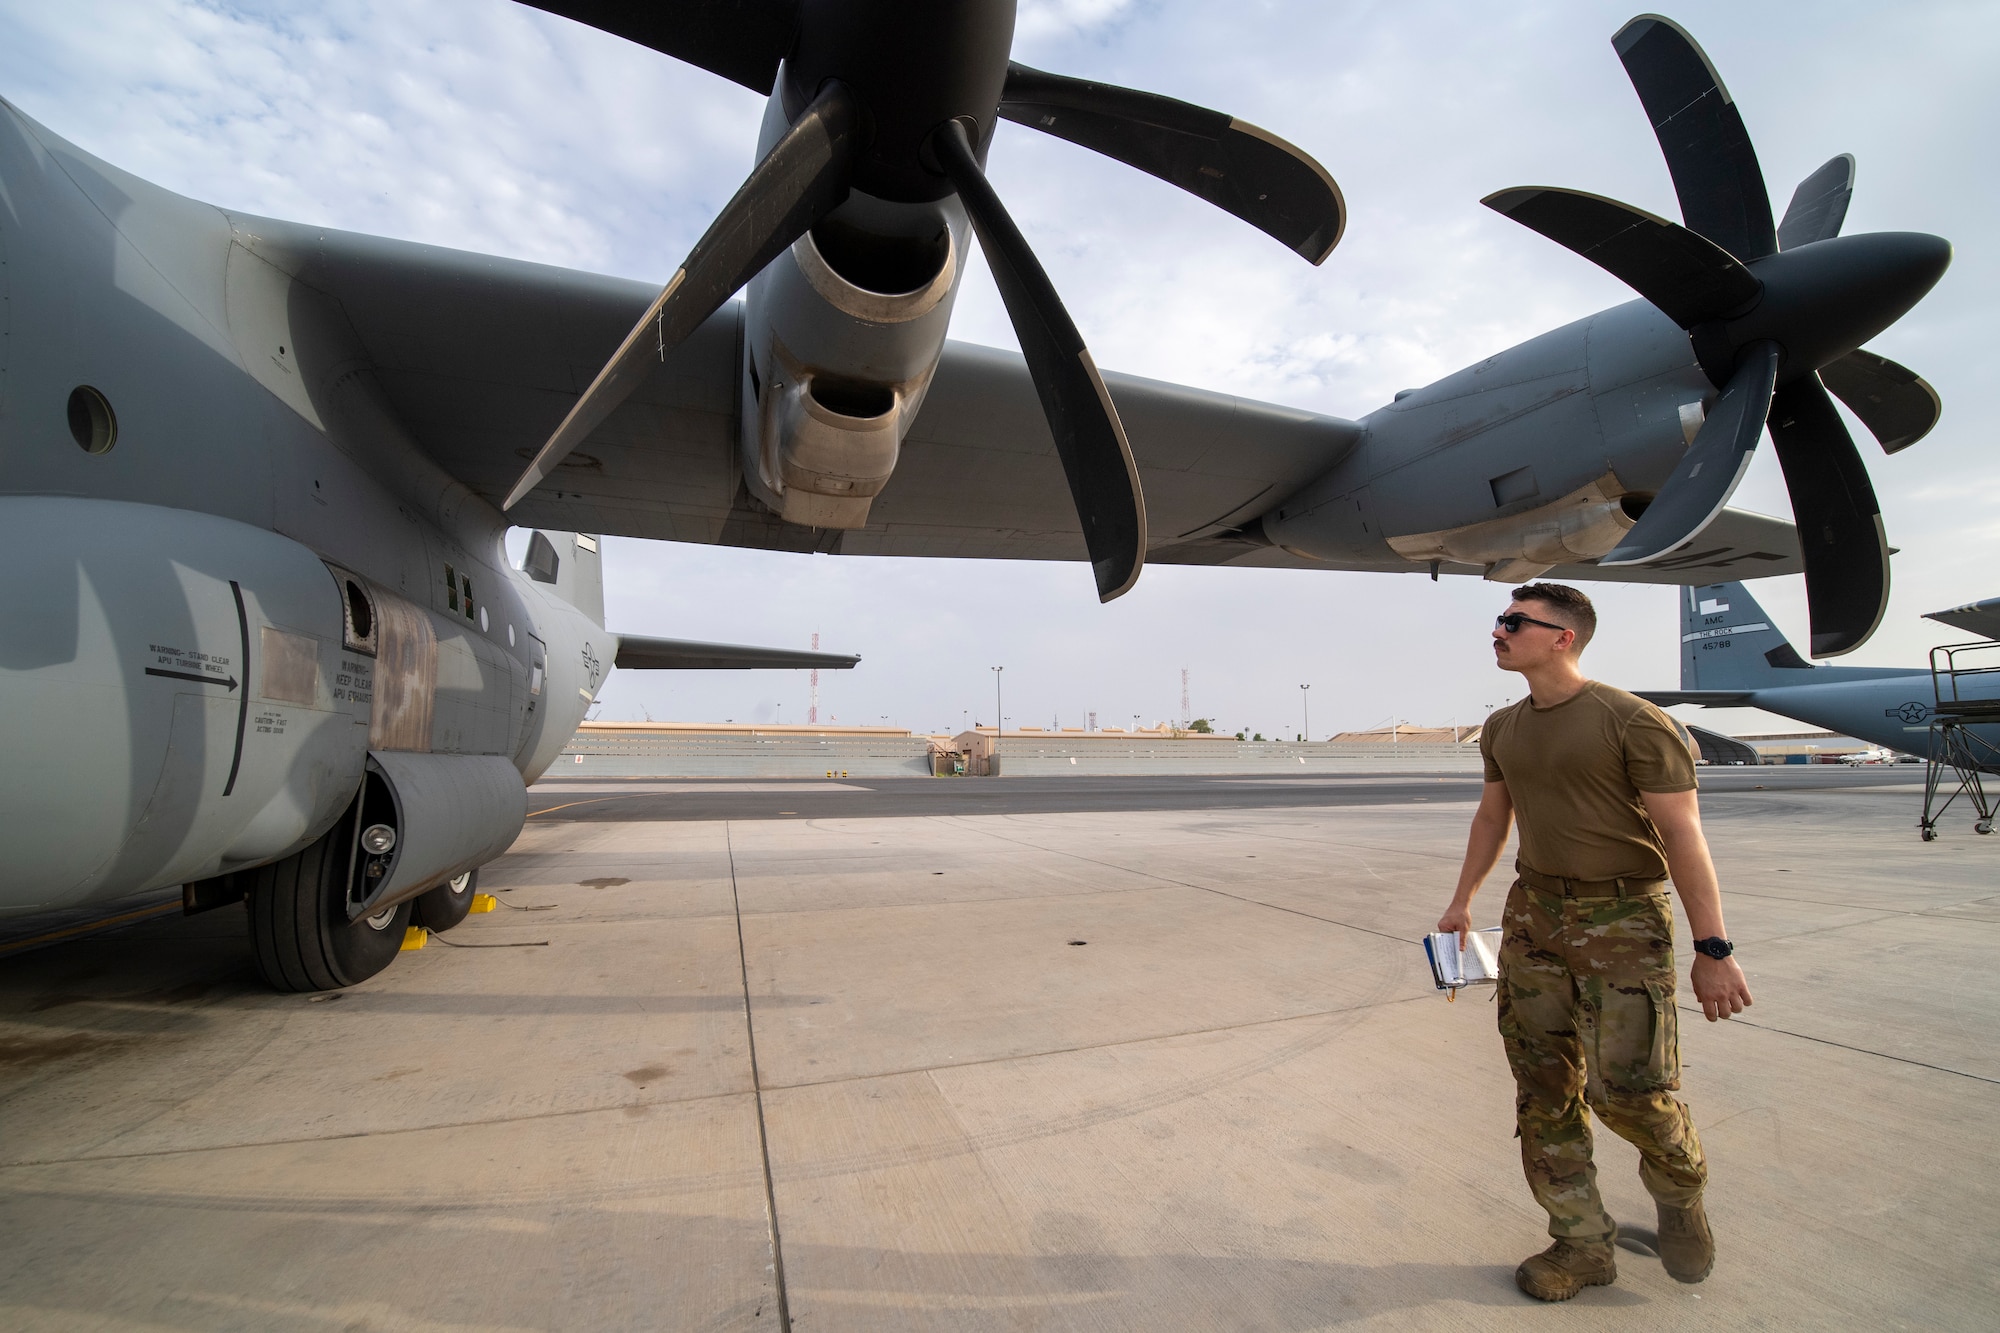 A U.S. Air Force 75th Expeditionary Airlift Squadron (EAS) loadmaster performs a preflight visual inspection on a C-130J Super Hercules at Camp Lemonnier, Djibouti, June 28, 2020. The 75th EAS provides strategic airlift capabilities across the Combined Joint Task Force - Horn of Africa (CJTF-HOA) area of responsibility. (U.S. Air Force photo by Tech. Sgt. Christopher Ruano)